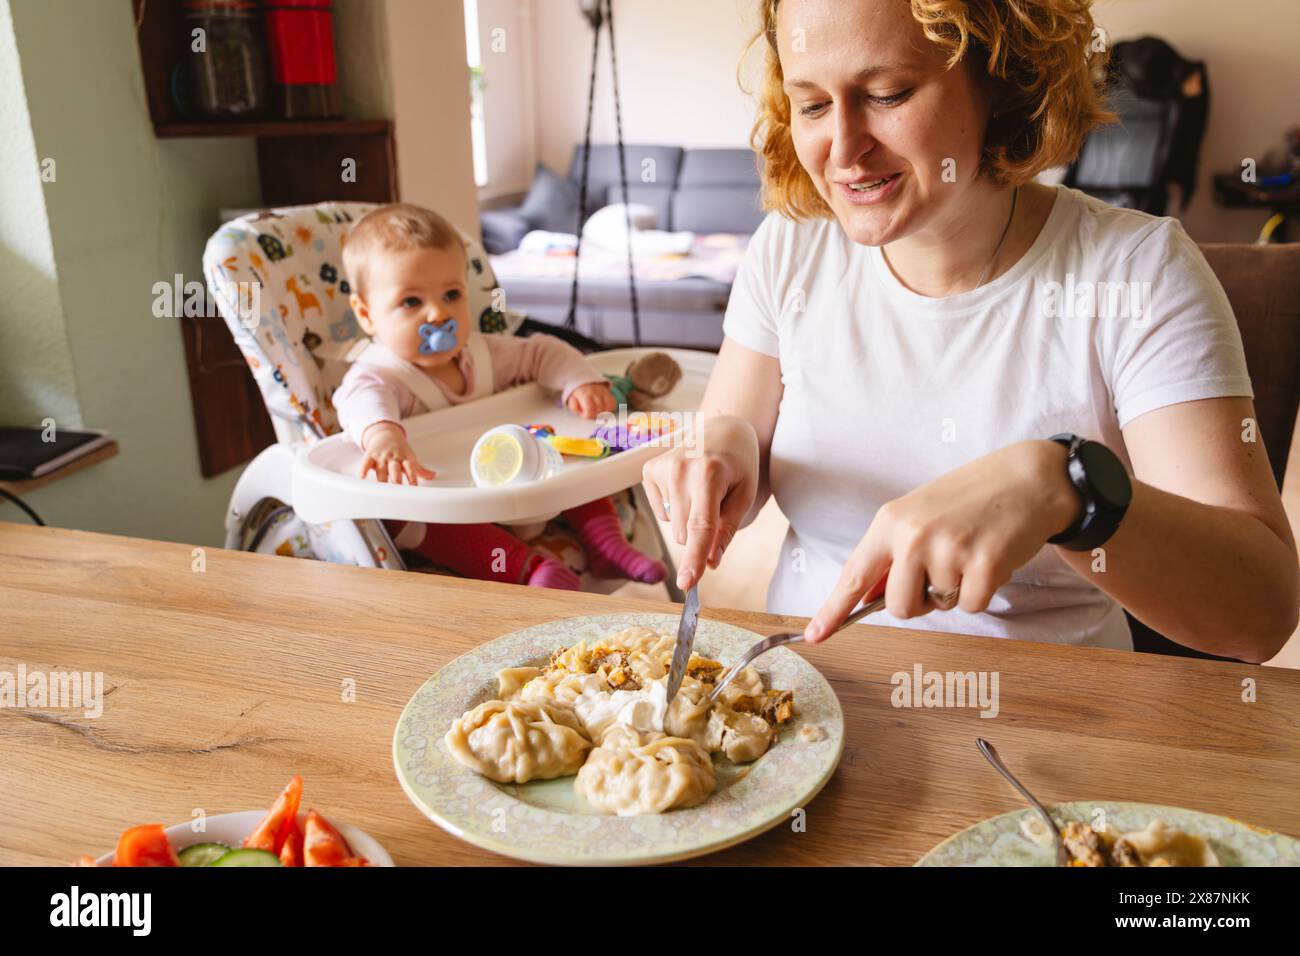 Smiling woman eating meal sitting next to daughter at home Stock Photo